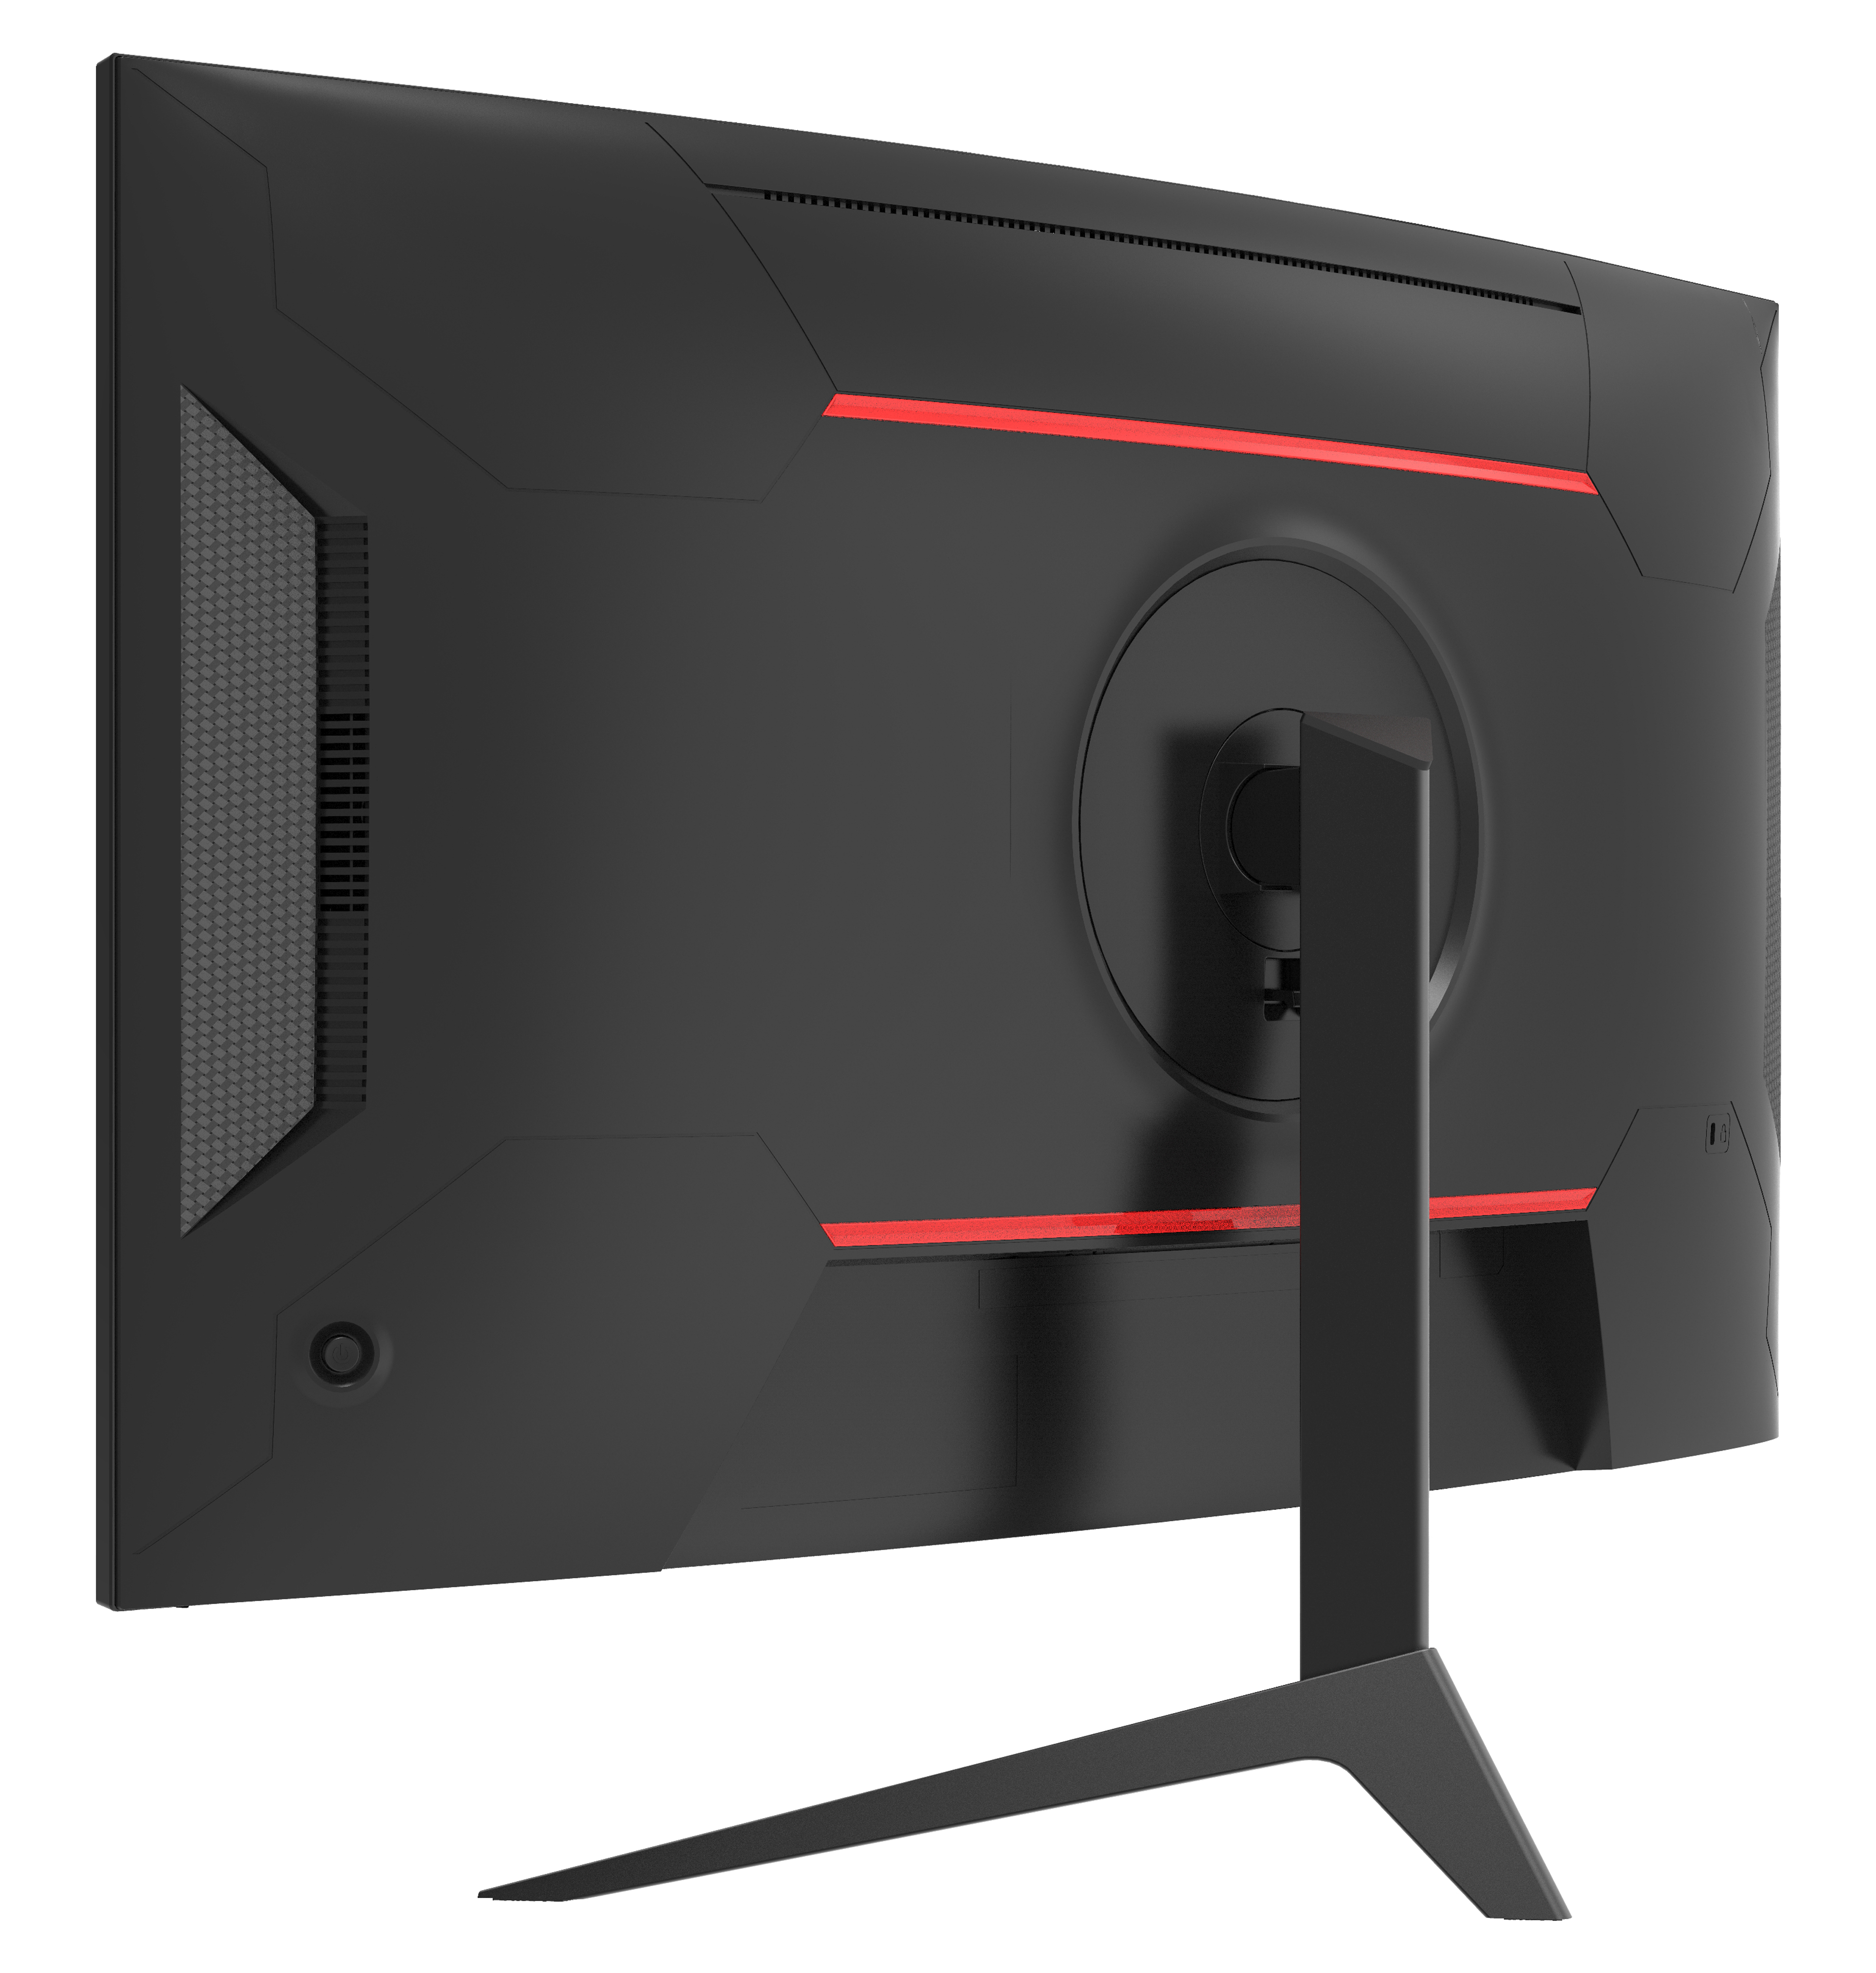 Full-HD (1 Monitor Gaming Reaktionszeit POWER LC-M27-FHD-165-C-V3 27 LC Zoll Hz ) ms , 165